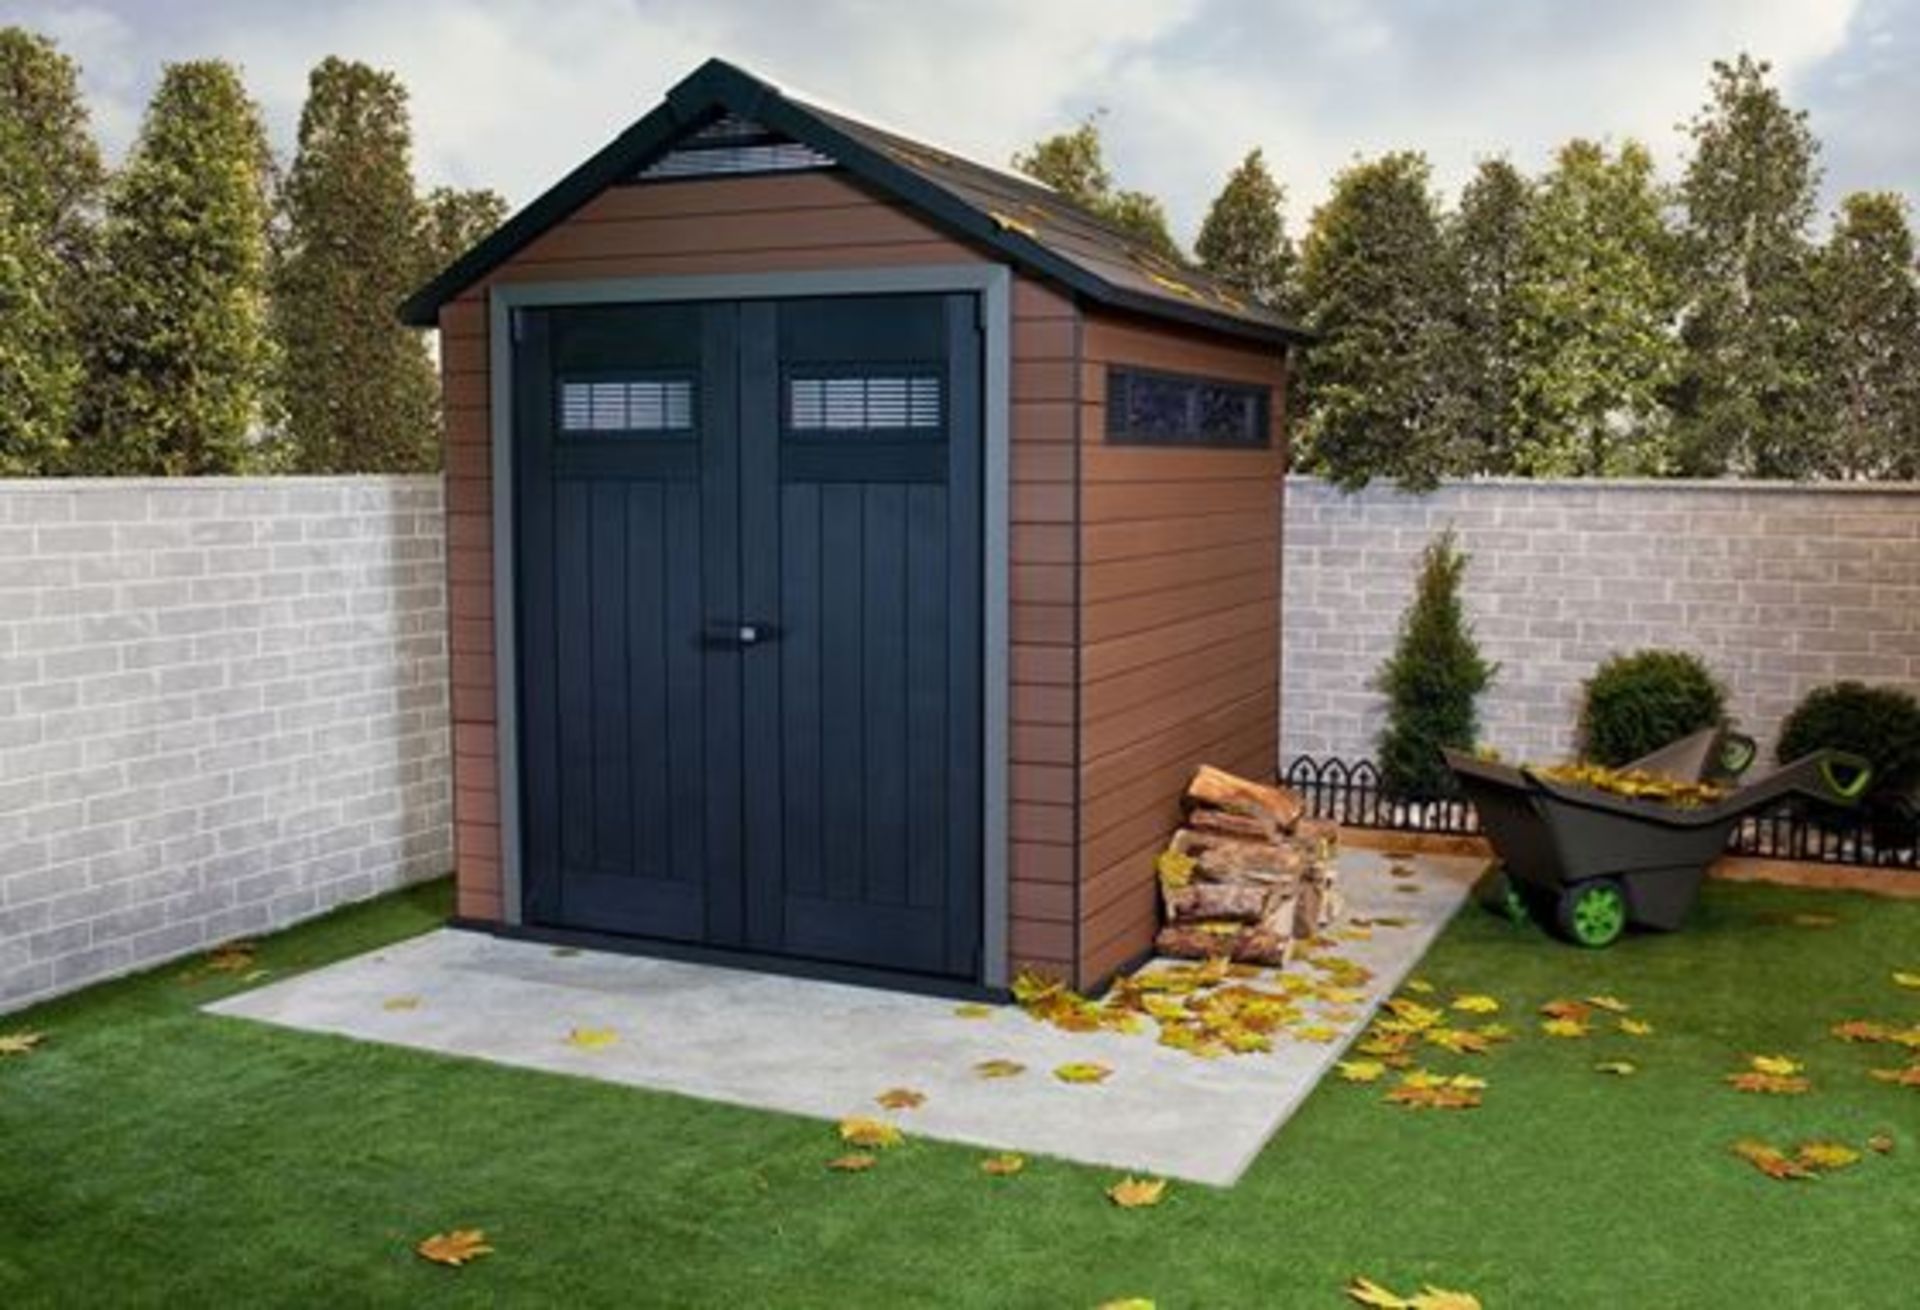 Keter Fusion 757 Garden Shed - As new From the steel-reinforced tile roof down to the heavy-duty